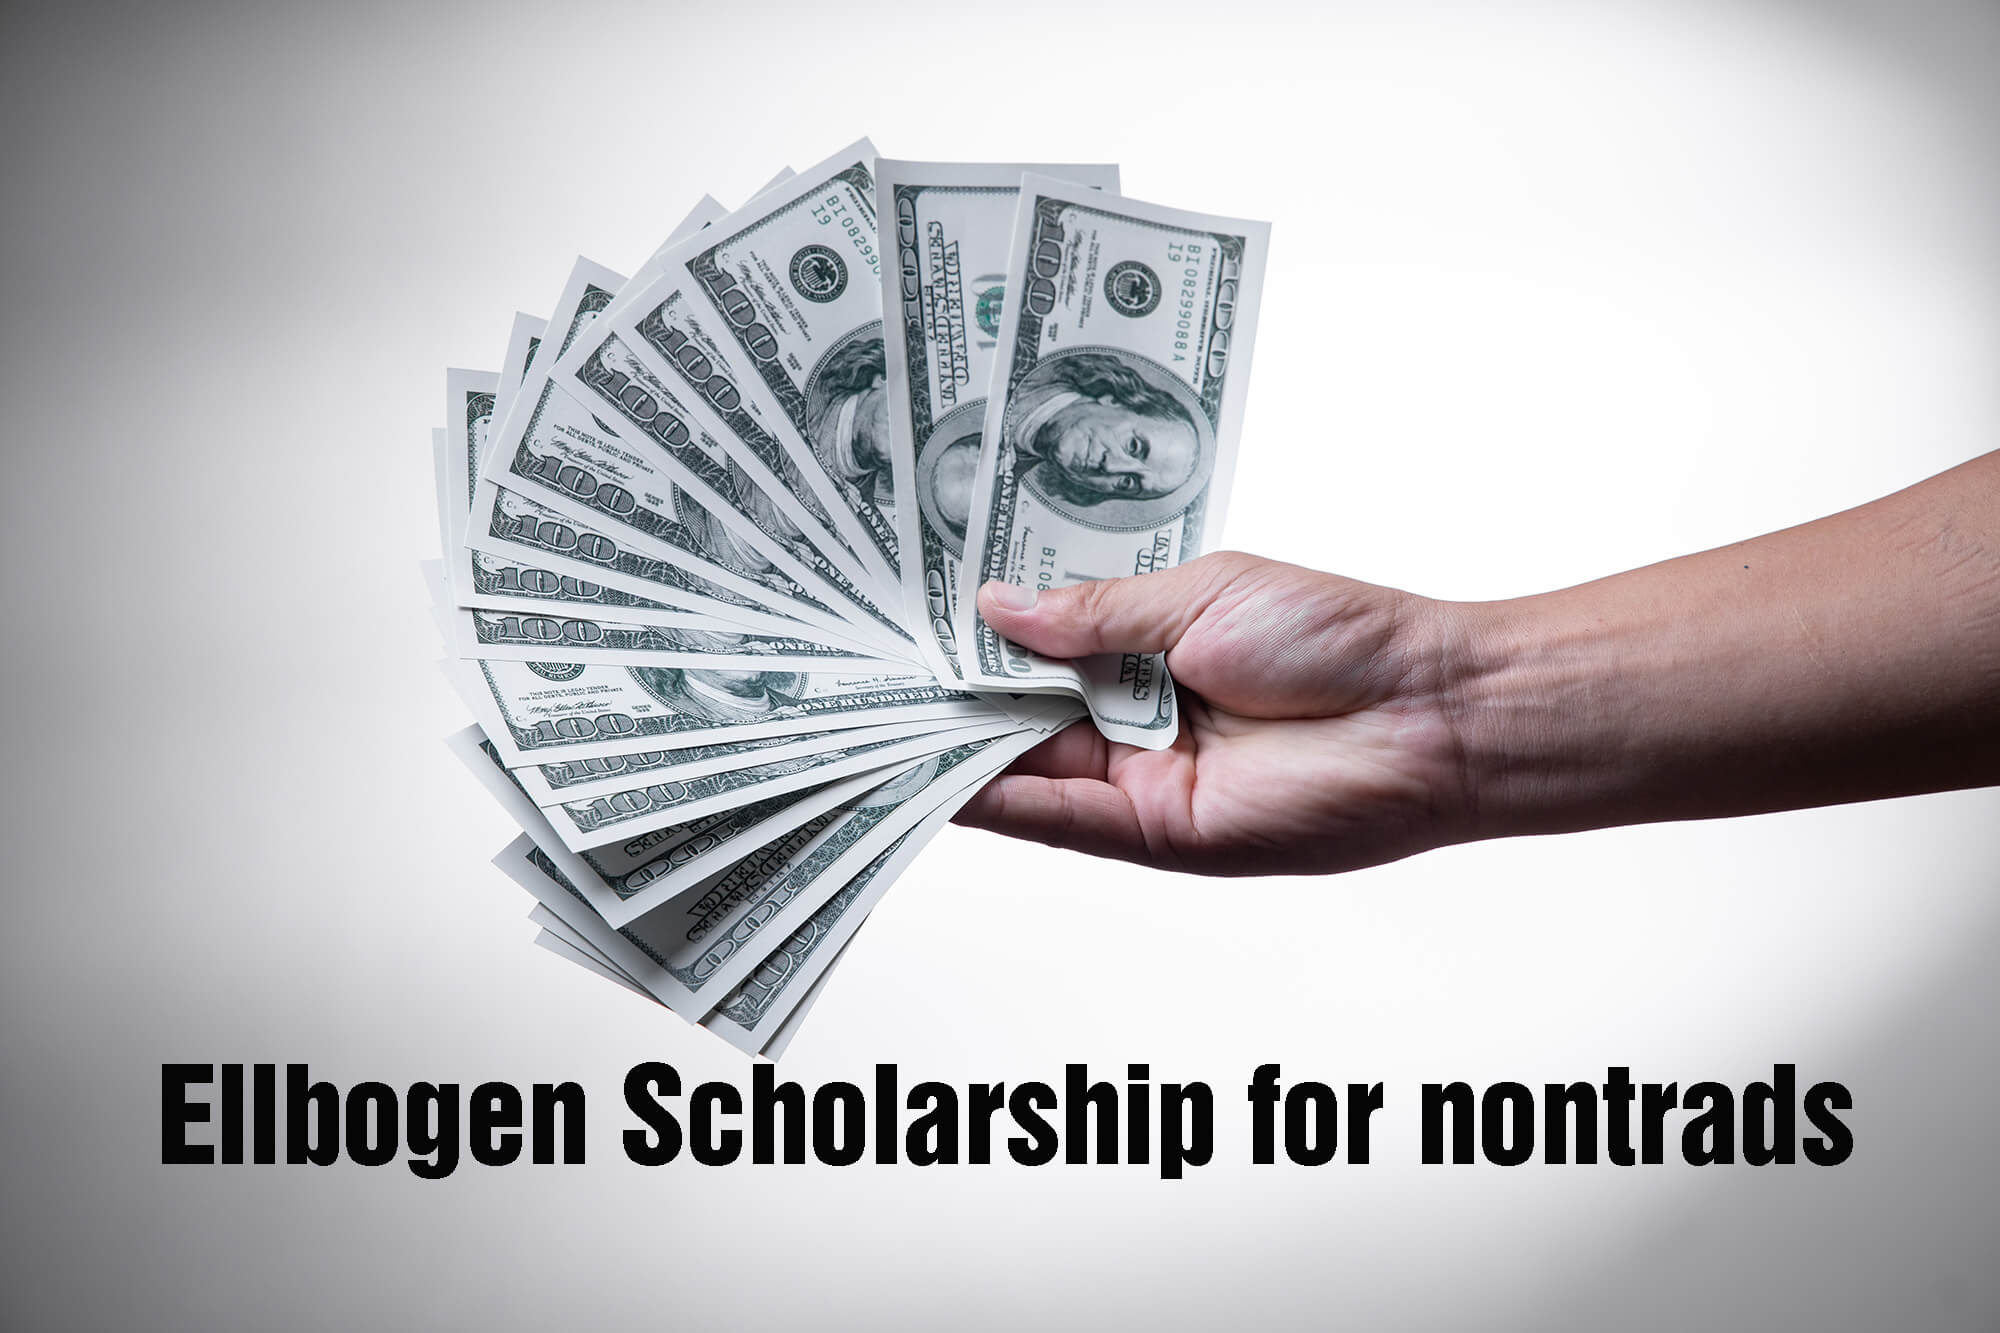 Photo of money in a person's had for the Ellbogen Scholarship press release